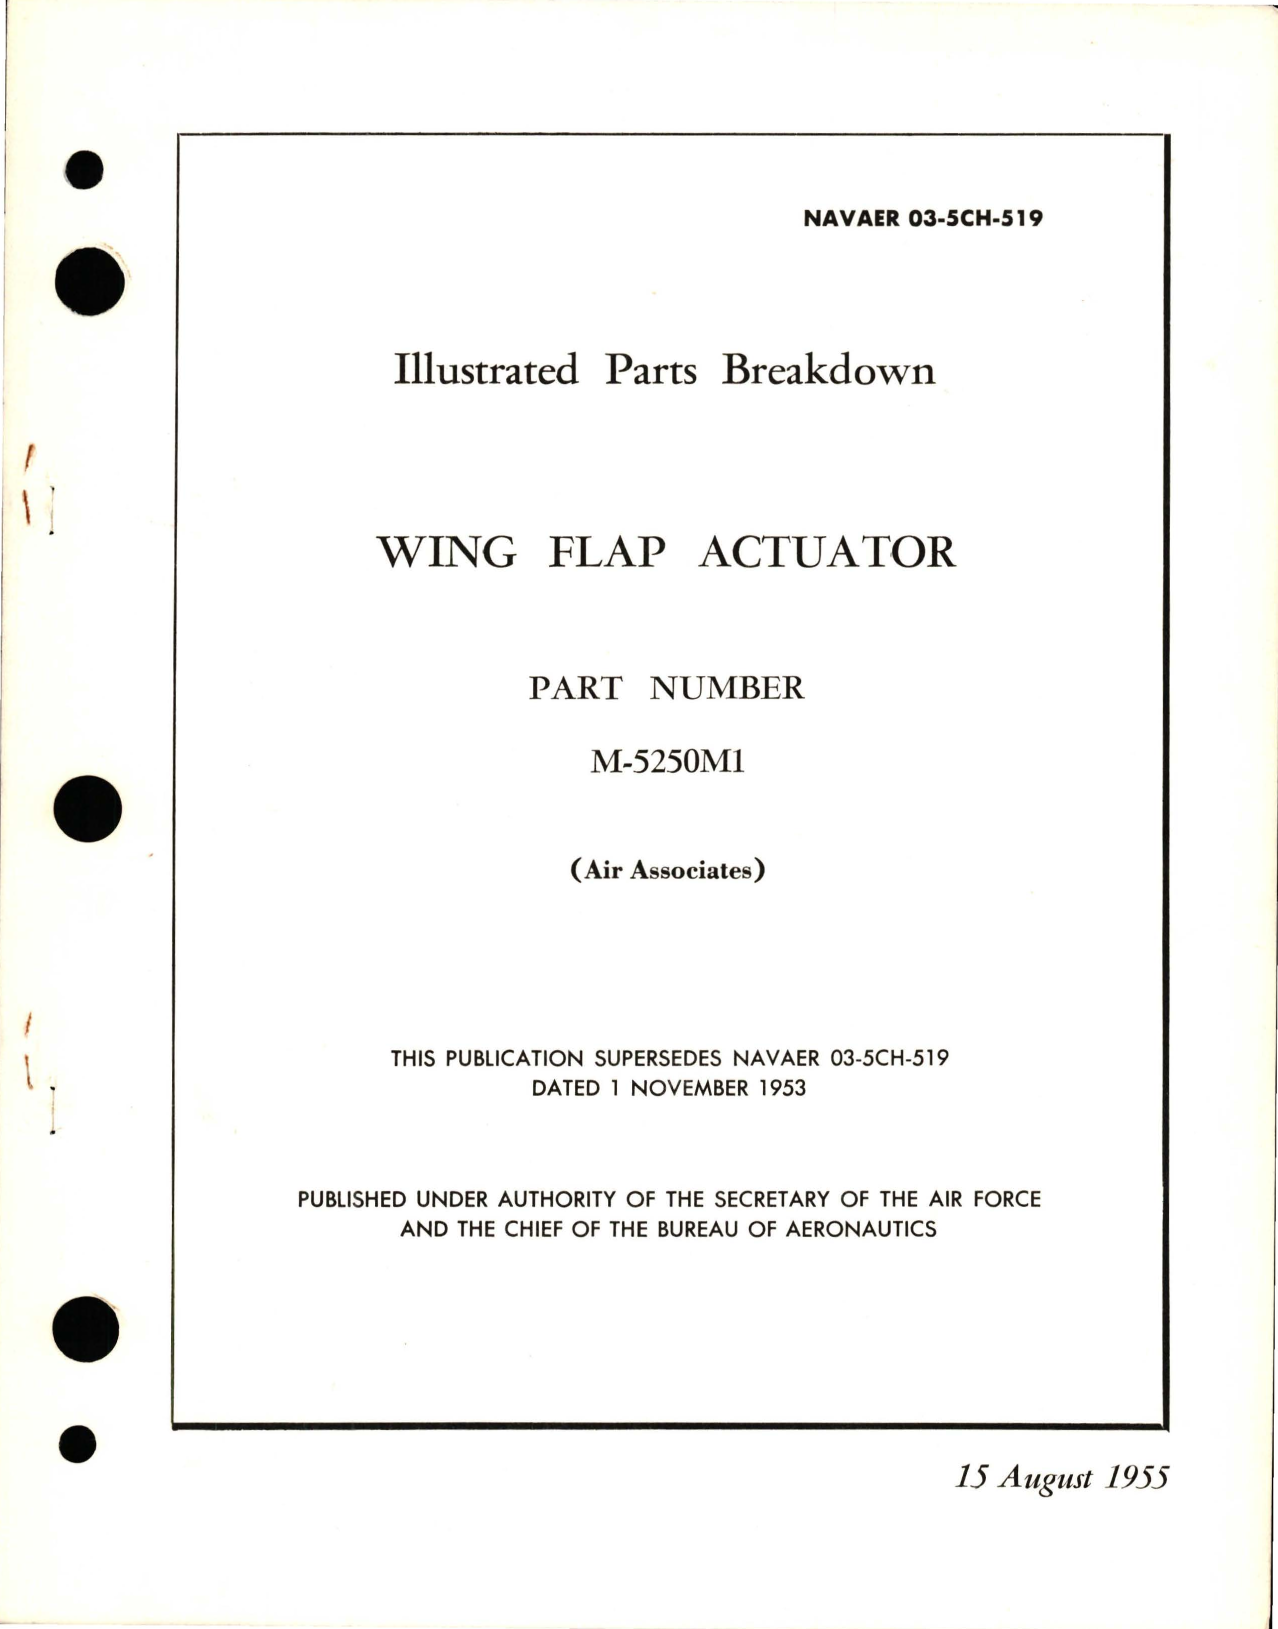 Sample page 1 from AirCorps Library document: Illustrated Parts Breakdown for Wing Flap Actuator - Part M-5250M1